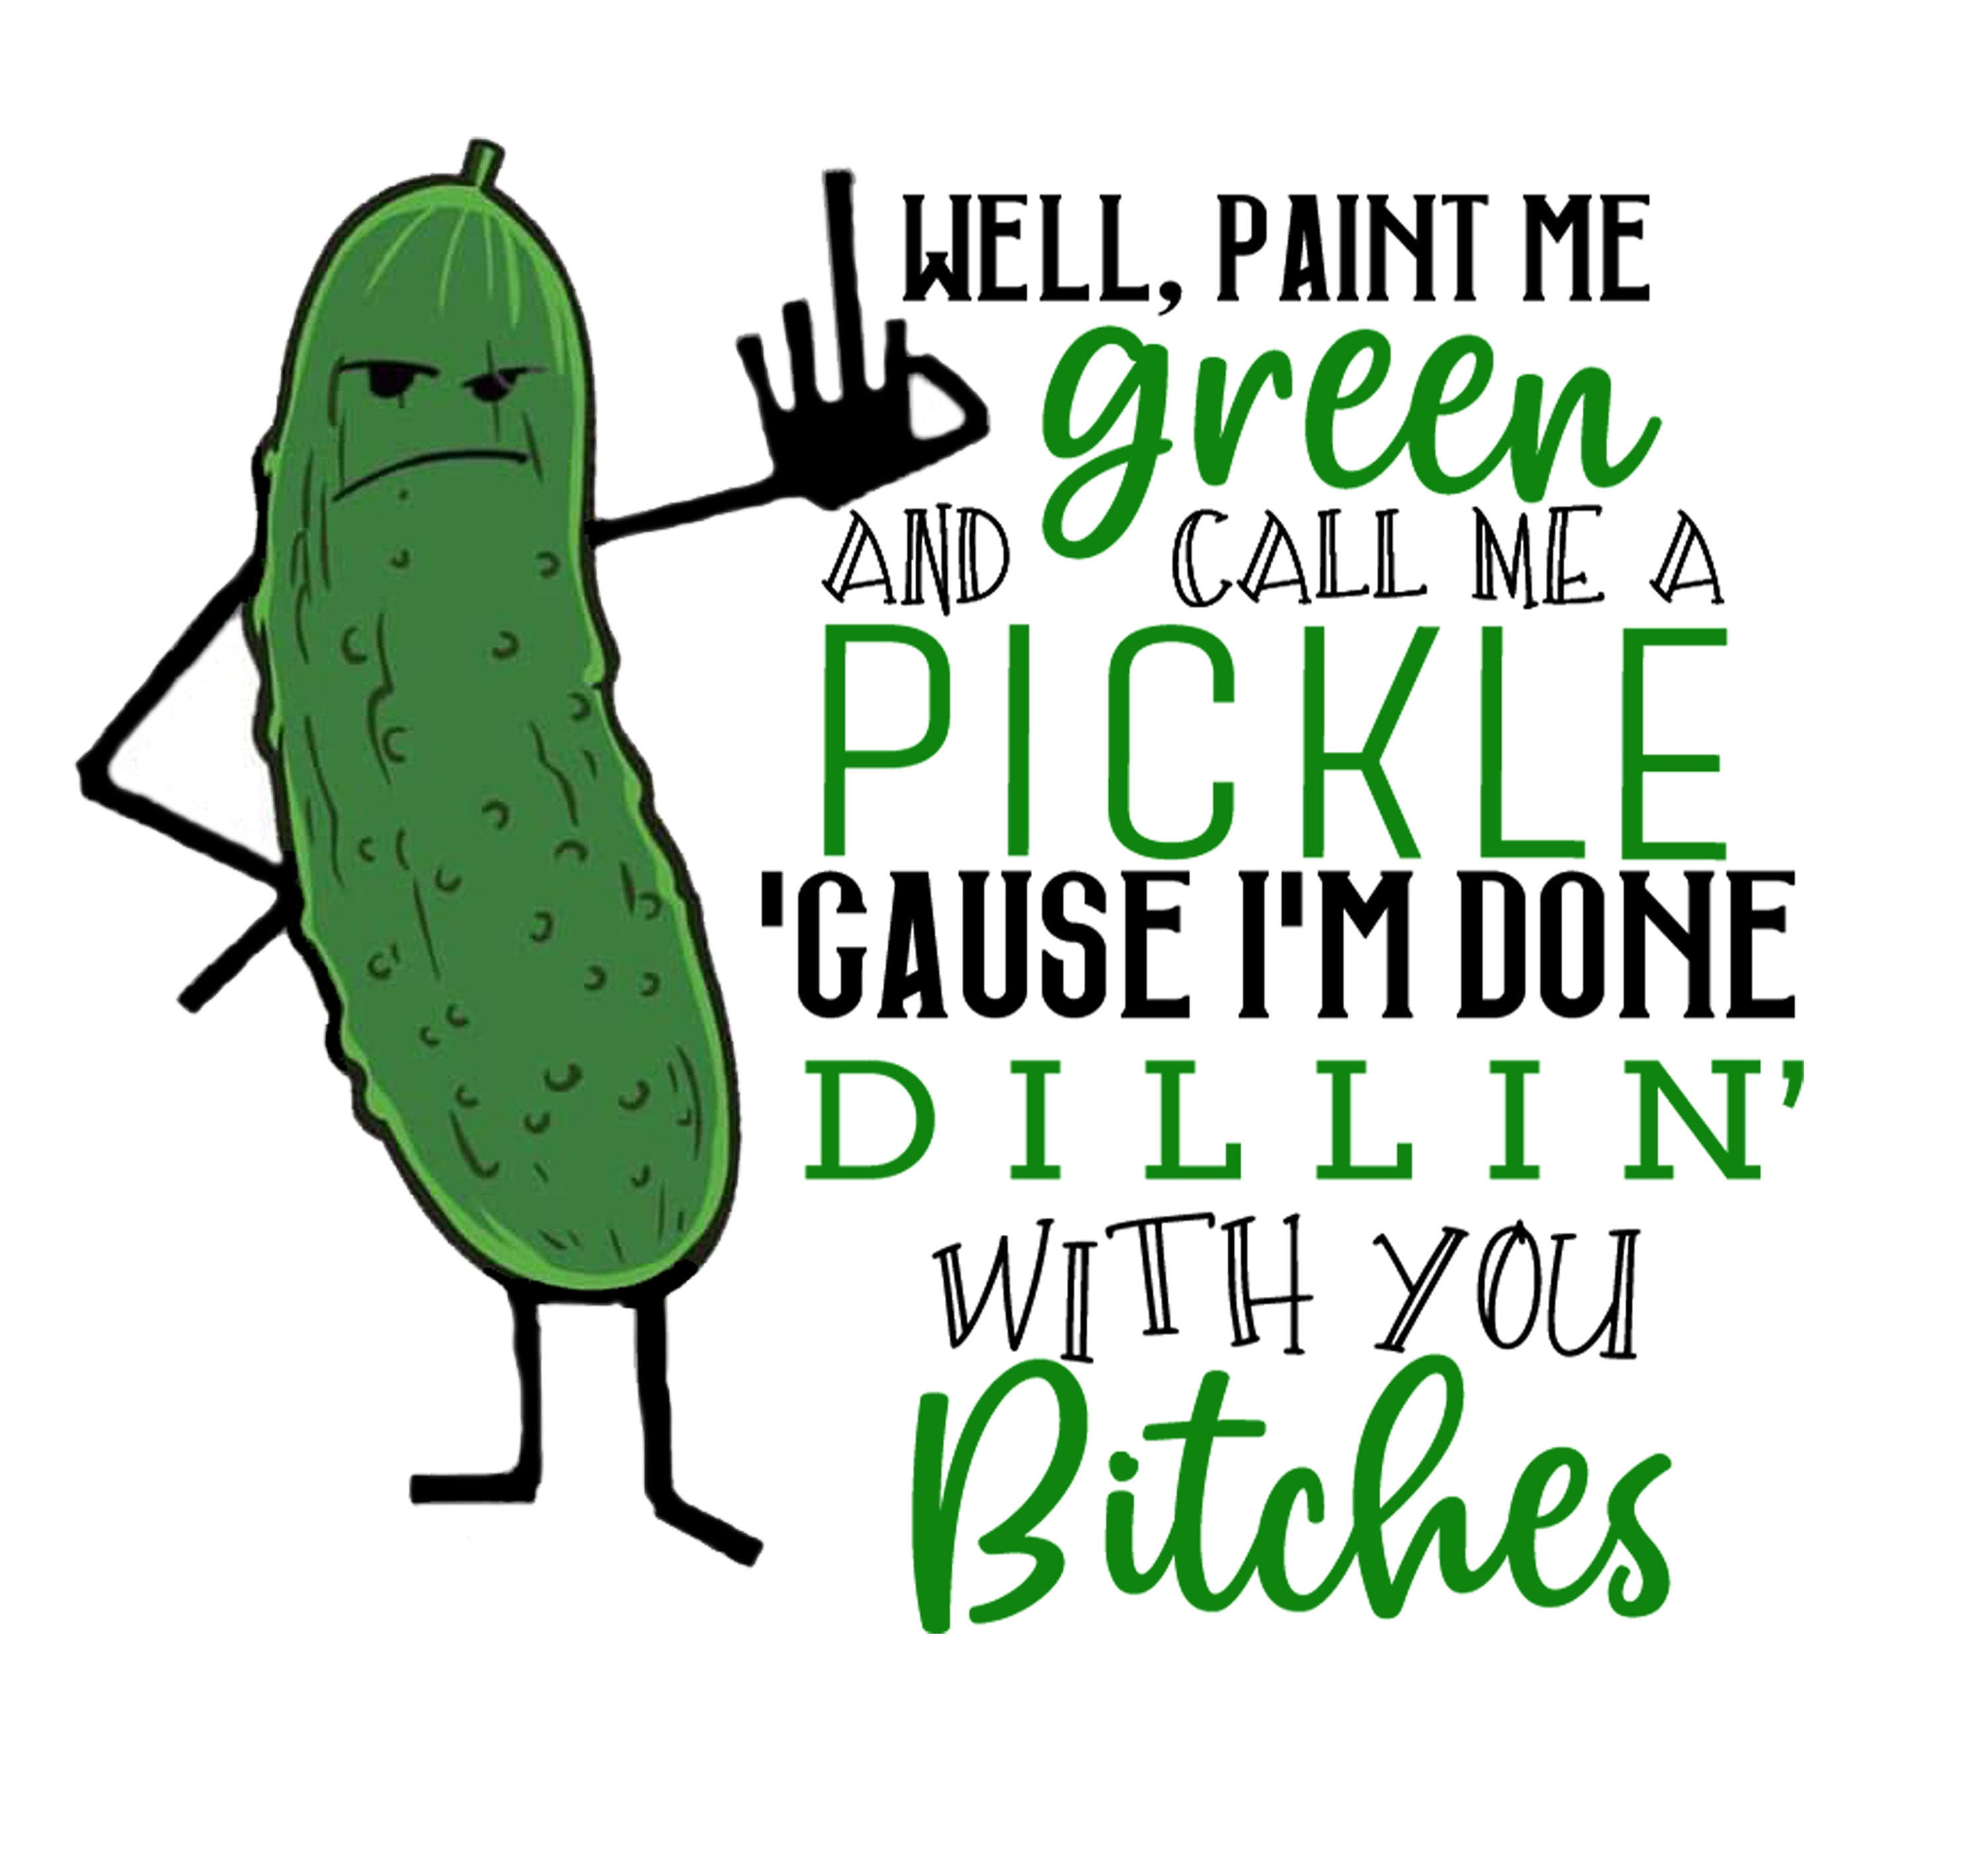 paint me green and call me a pickle meaning